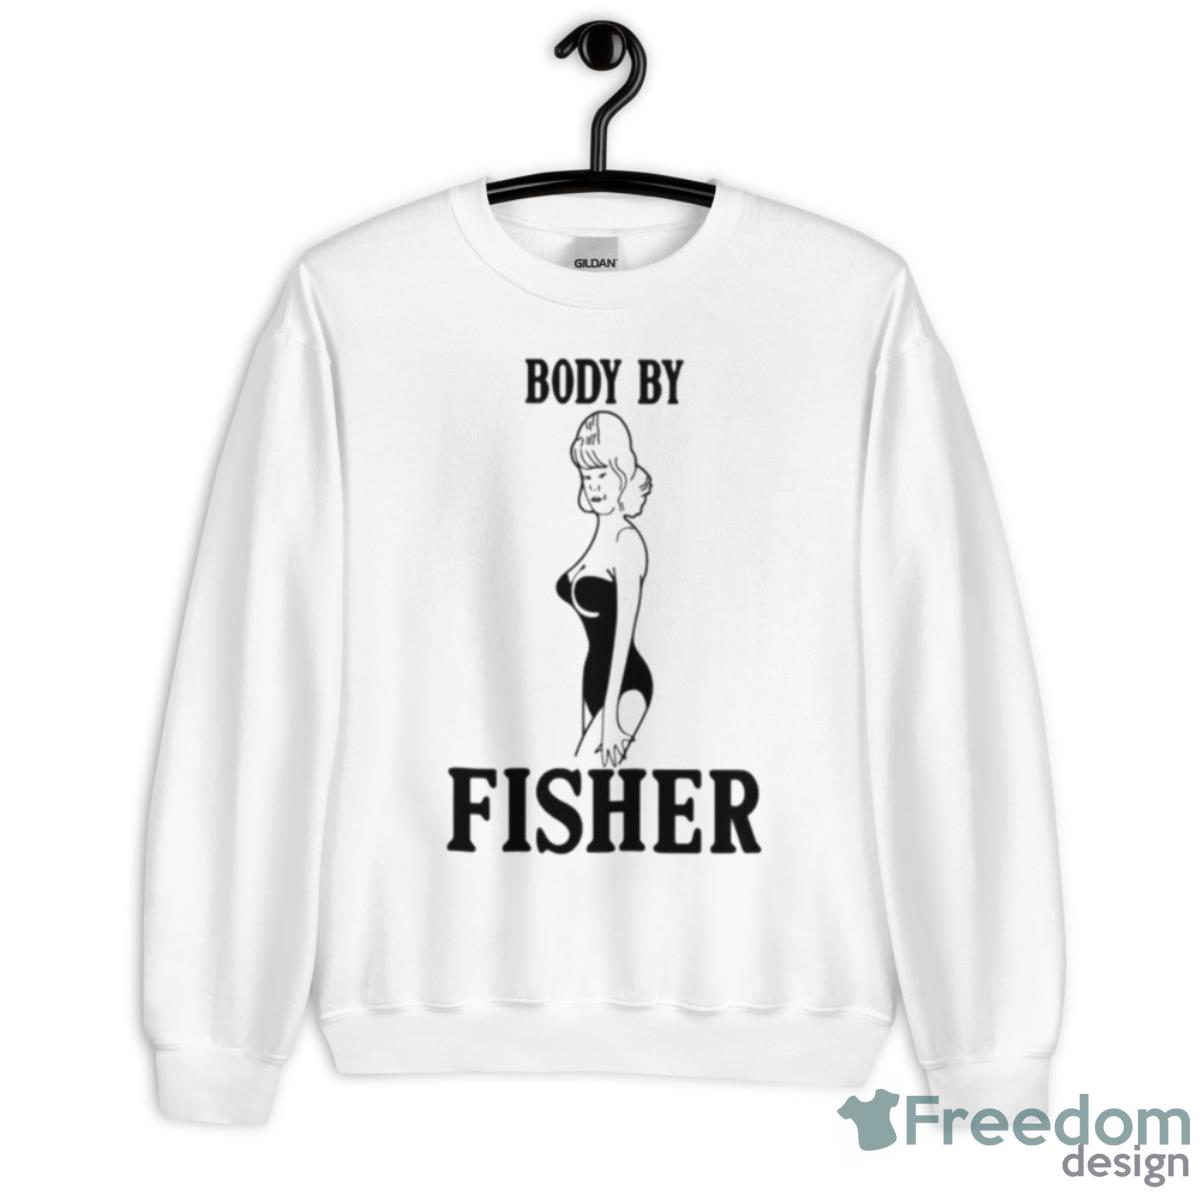 Body By Fisher Shirt